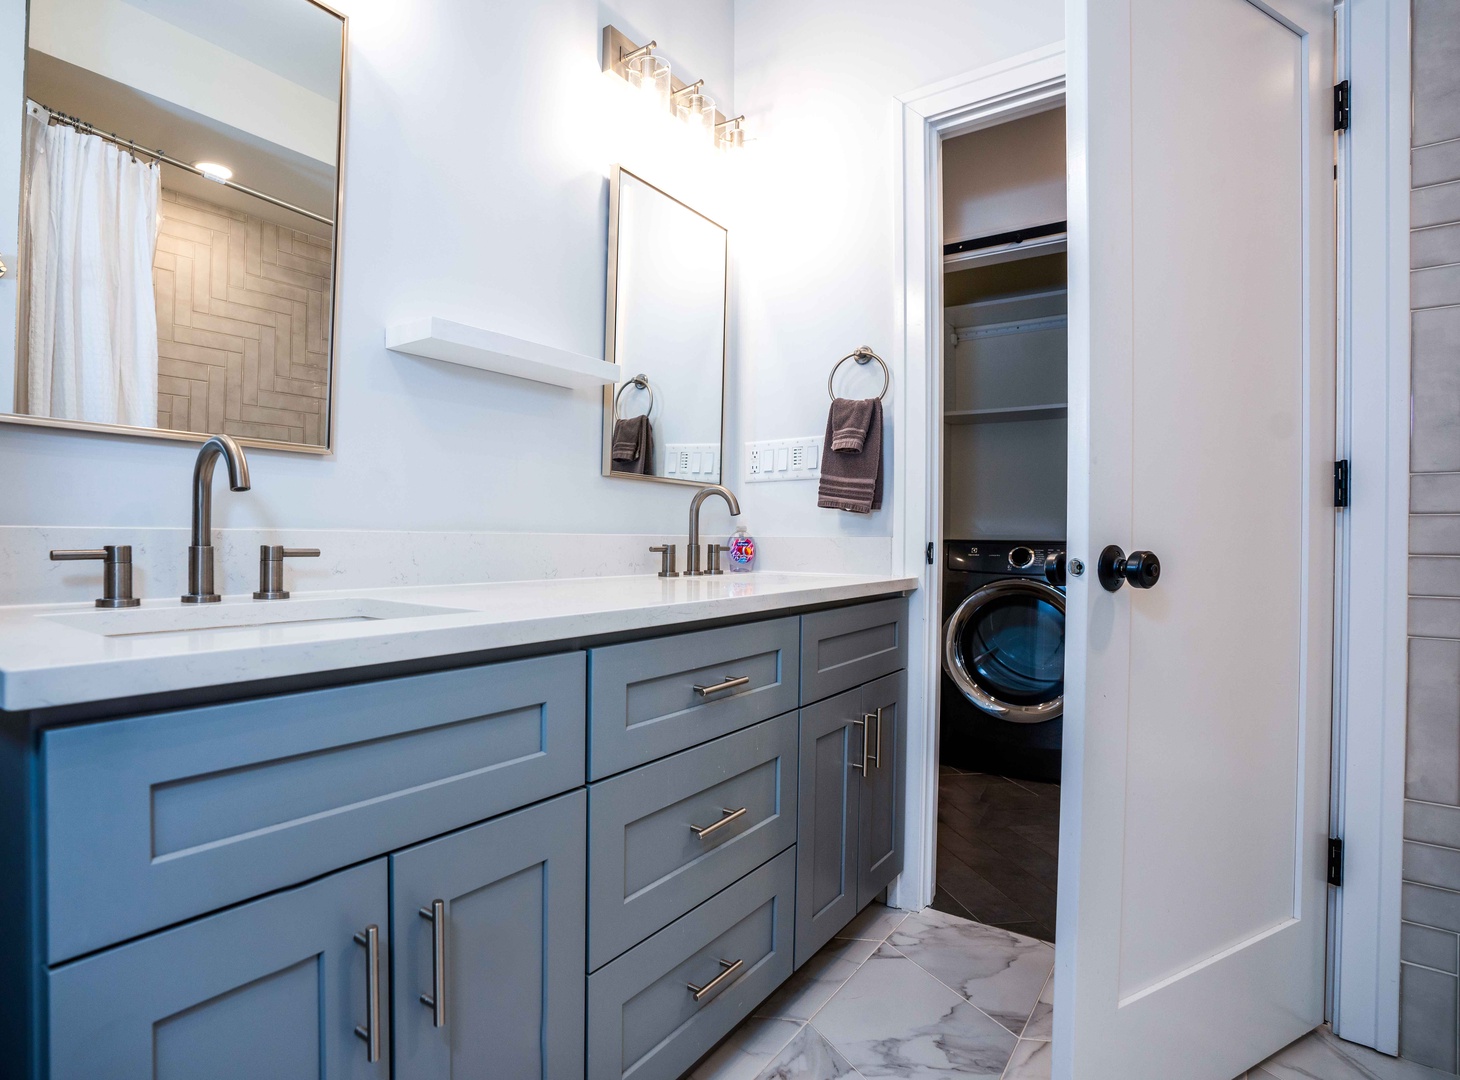 This sleek full bath features a double vanity, shower/tub combo, & laundry